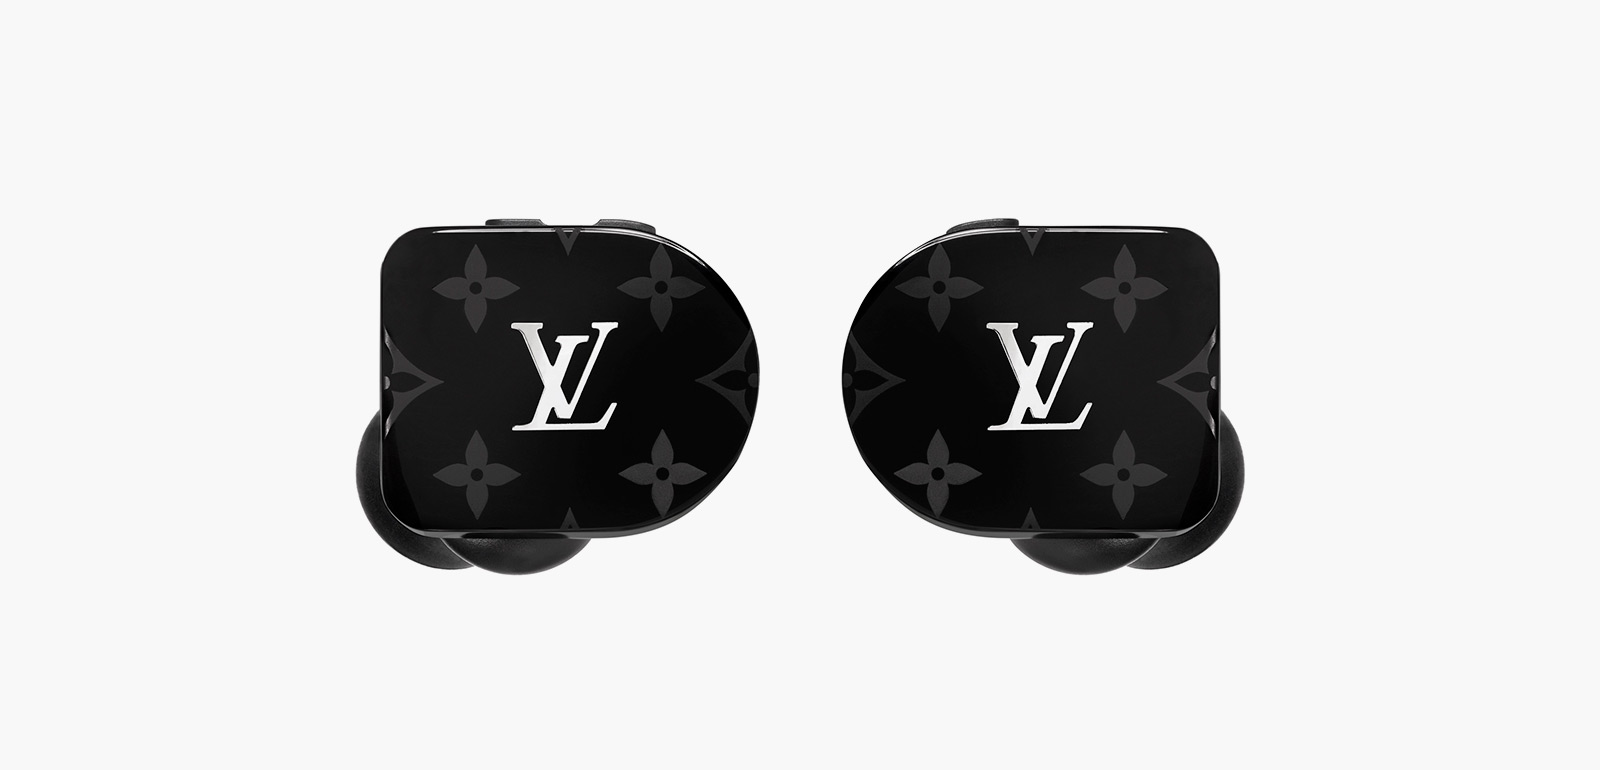 Master & Dynamic Introduced the new Louis Vuitton Horizon Earphones